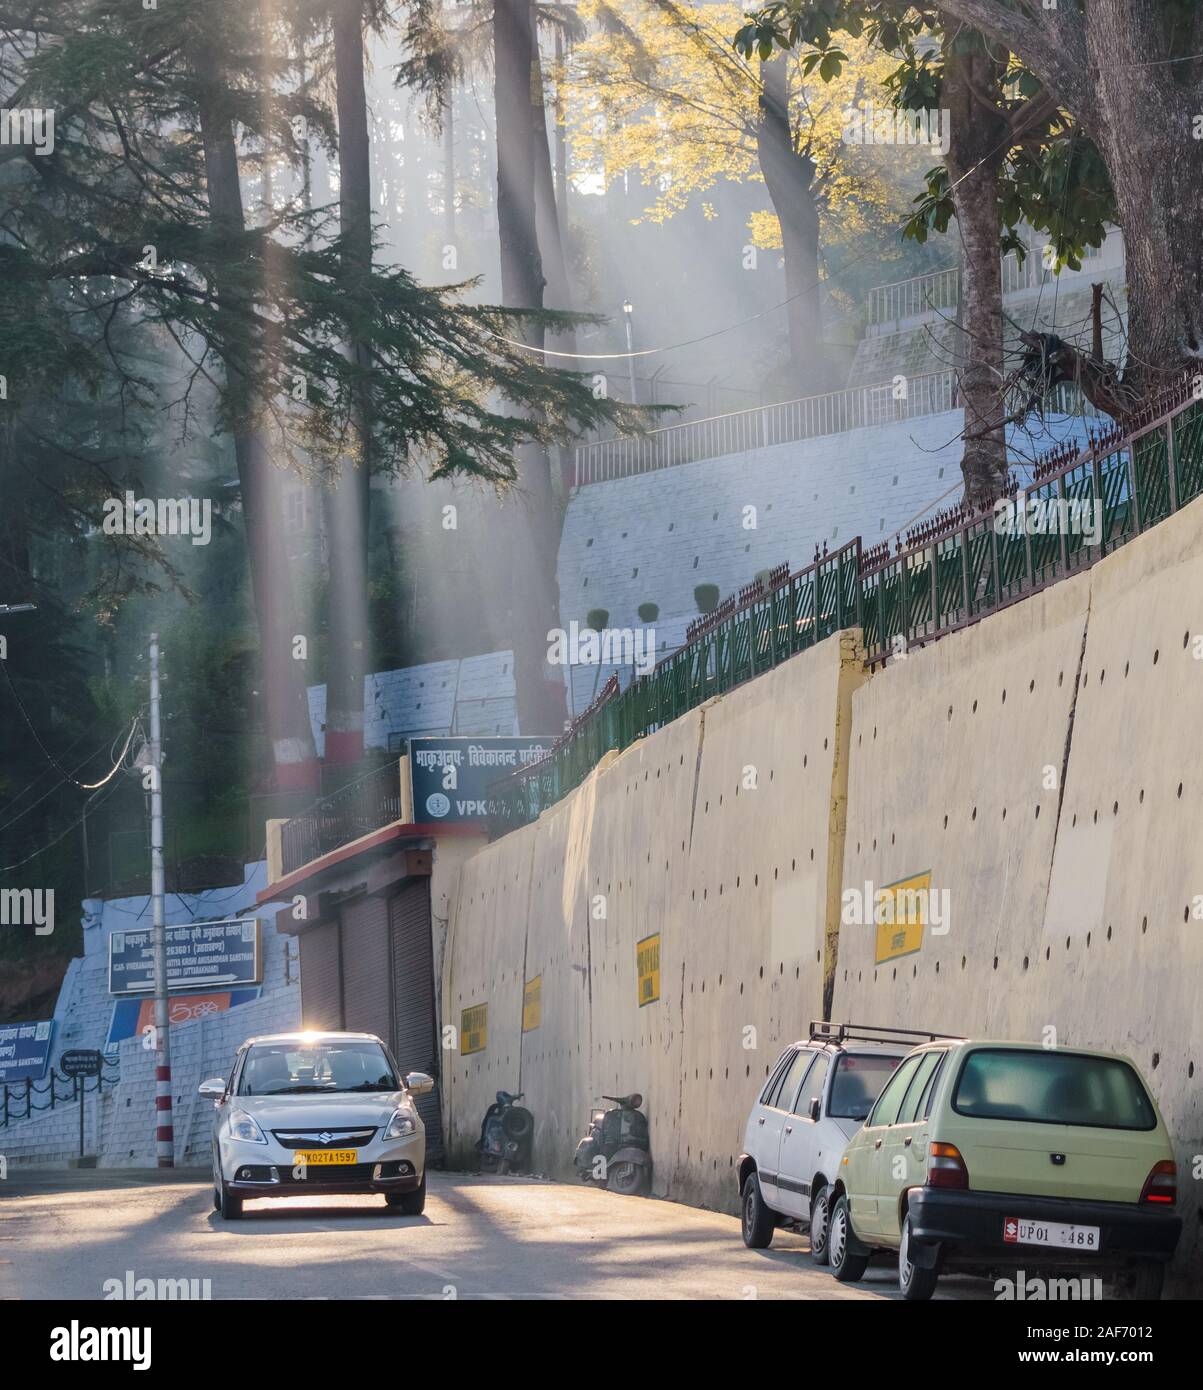 Shafts of light filter through the trees in the early morning hours in the Himalayan town of Almora. A Maruti Suzuki car drives down the road. Stock Photo